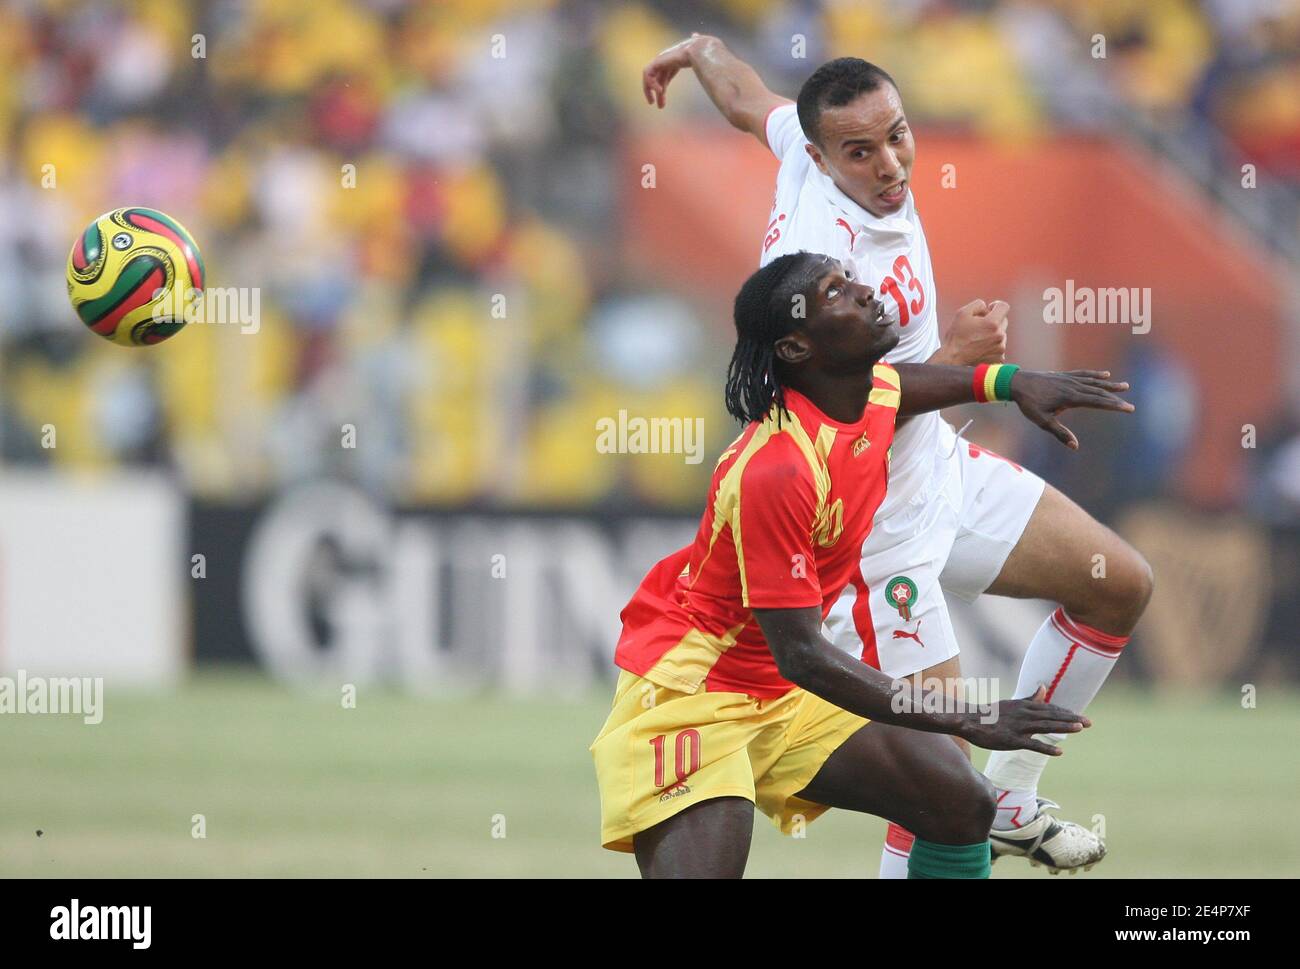 Guinea's Ismael Bangoura challenges Morocco's Houssine Kharja during the African Cup of Nations soccer match, Guinea vs Morocco in Accra, Ghana on January 24, 2008. Guinea won the game3-2. Photo by Steeve McMay/Cameleon/ABACAPRESS.COM Stock Photo